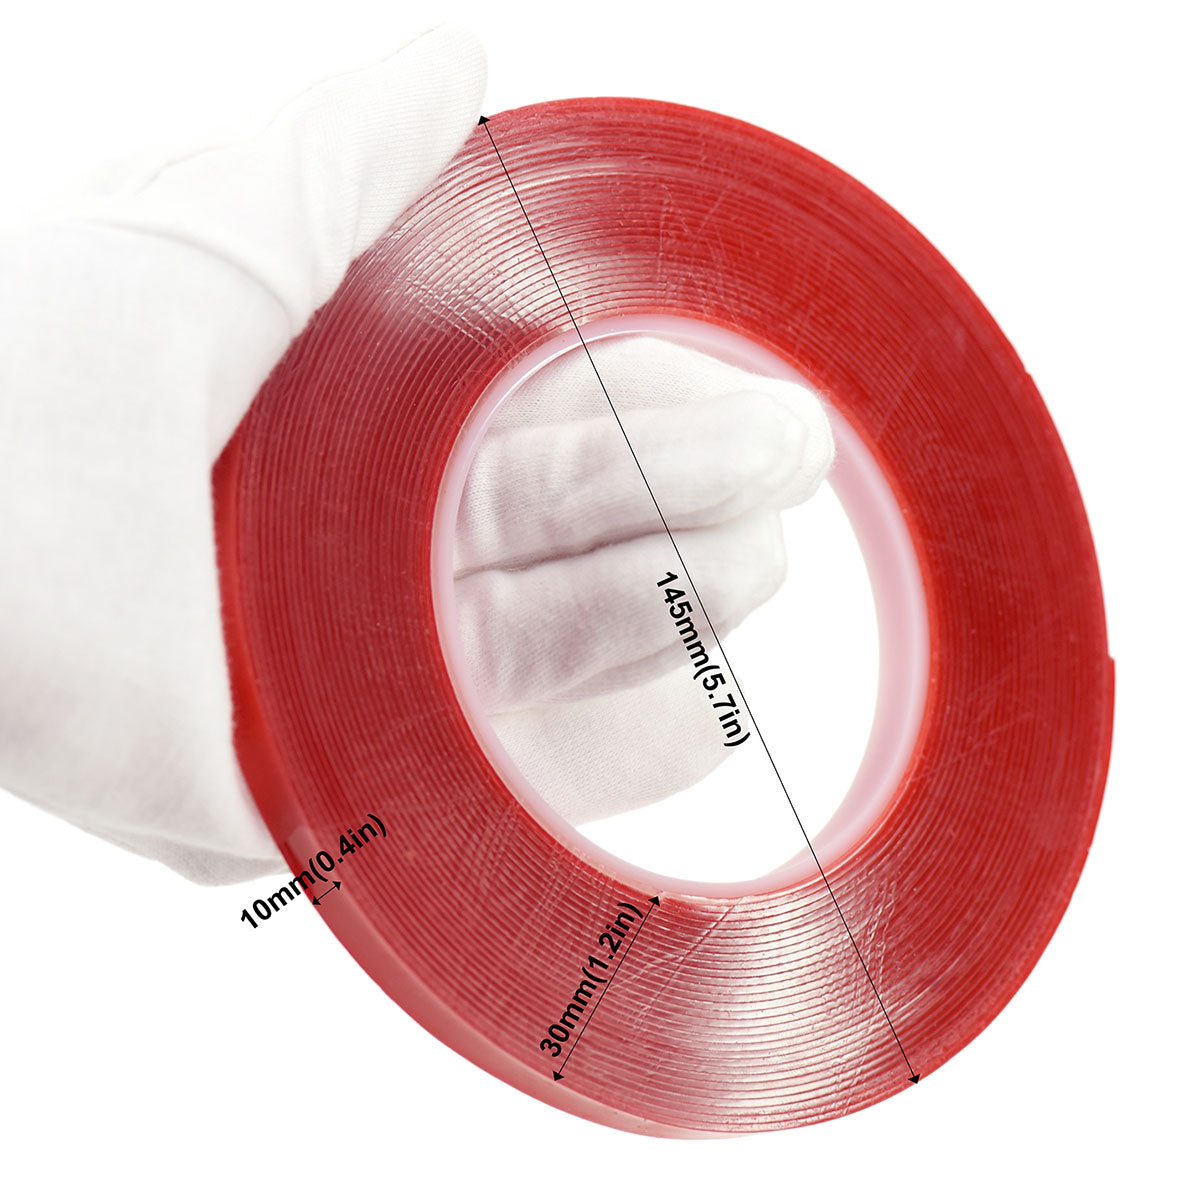 10mm x 1mm x 10 meters Multi-Purpose High Strength Transparent Acrylic Gel Adhesive Double Sided Tape Roll No Residue